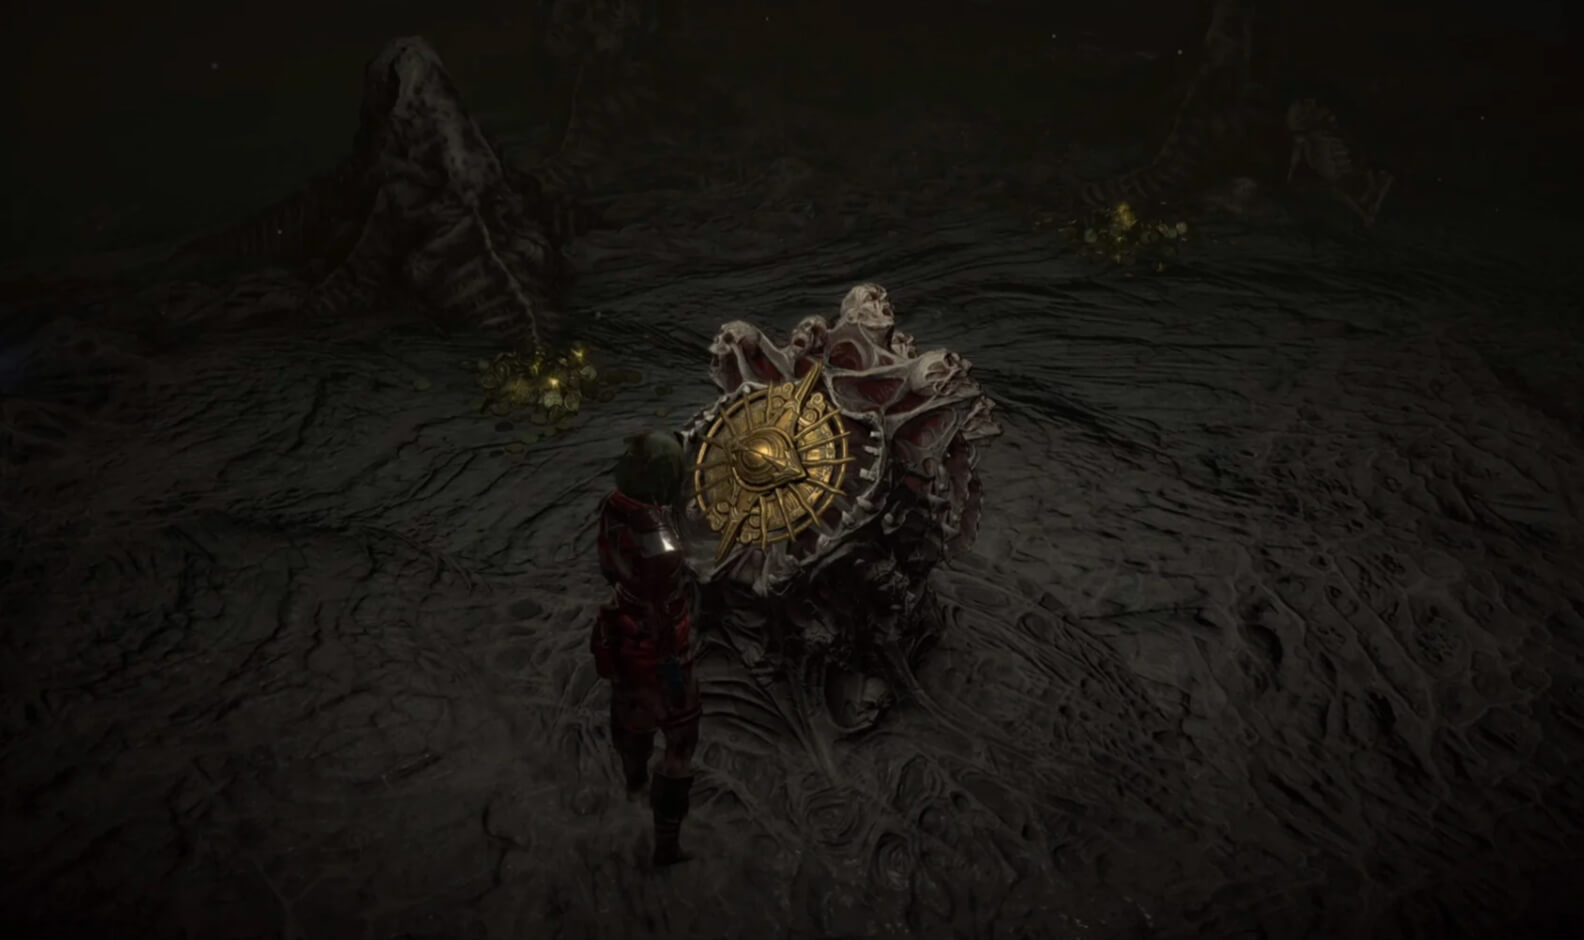 A Diablo IV character approaches a gold relic enshrined in a decrepit mass of heads and skulls.